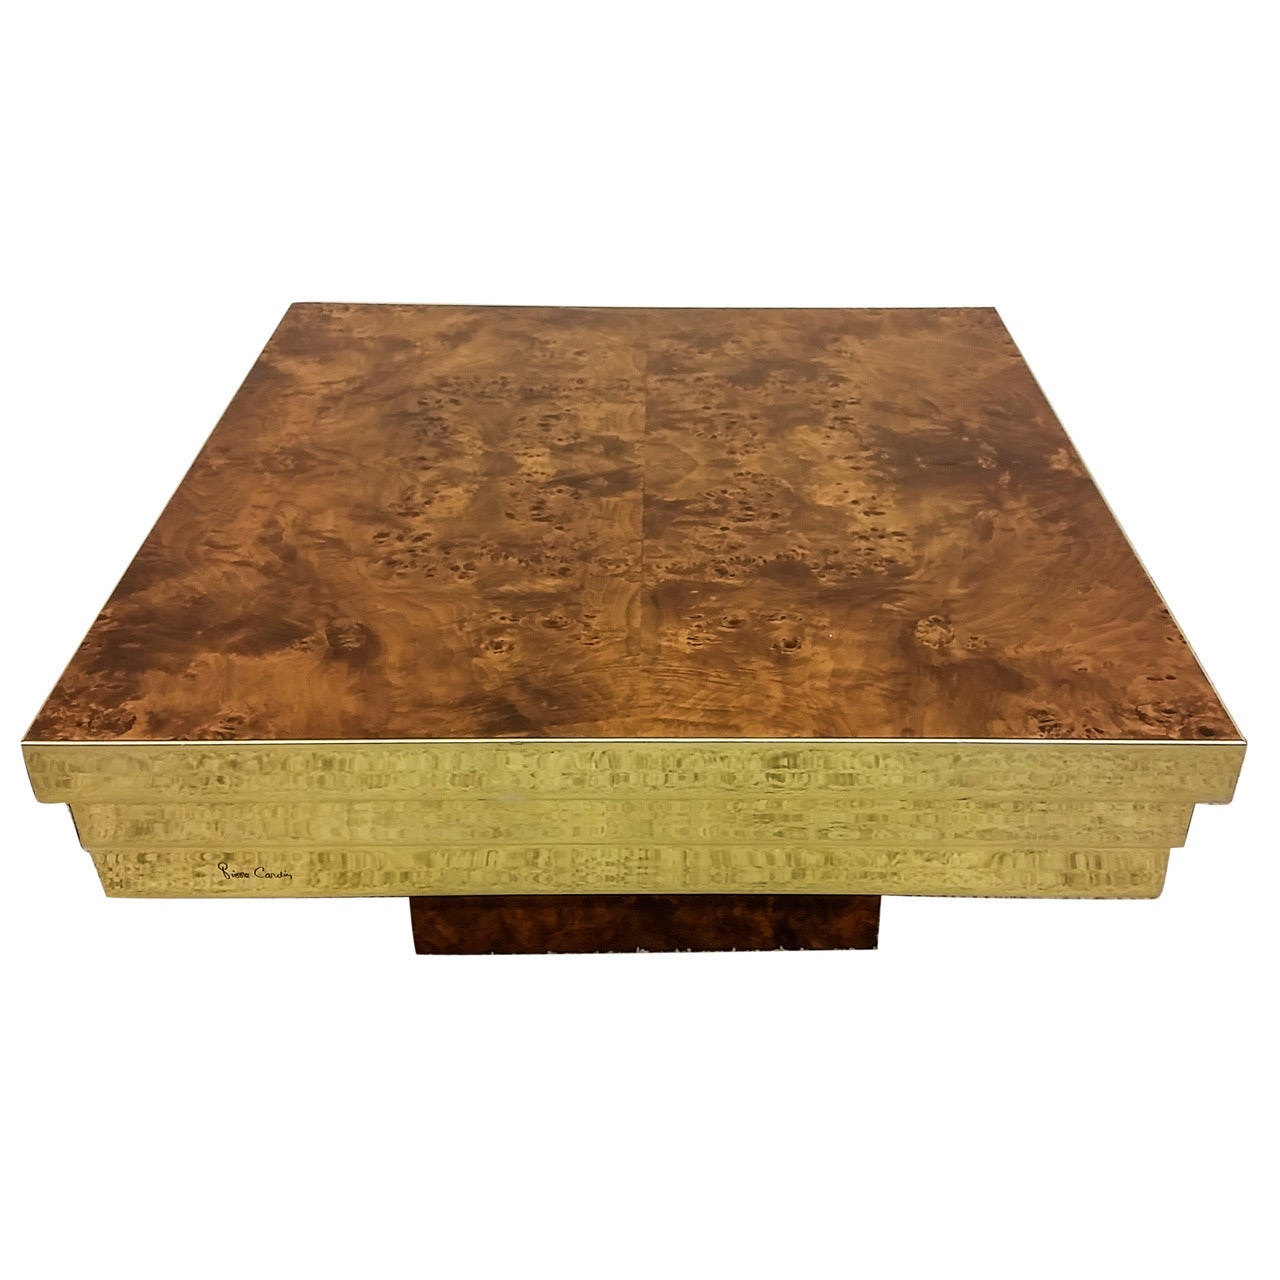 Pierre Cardin Brass and Burl Coffee Table